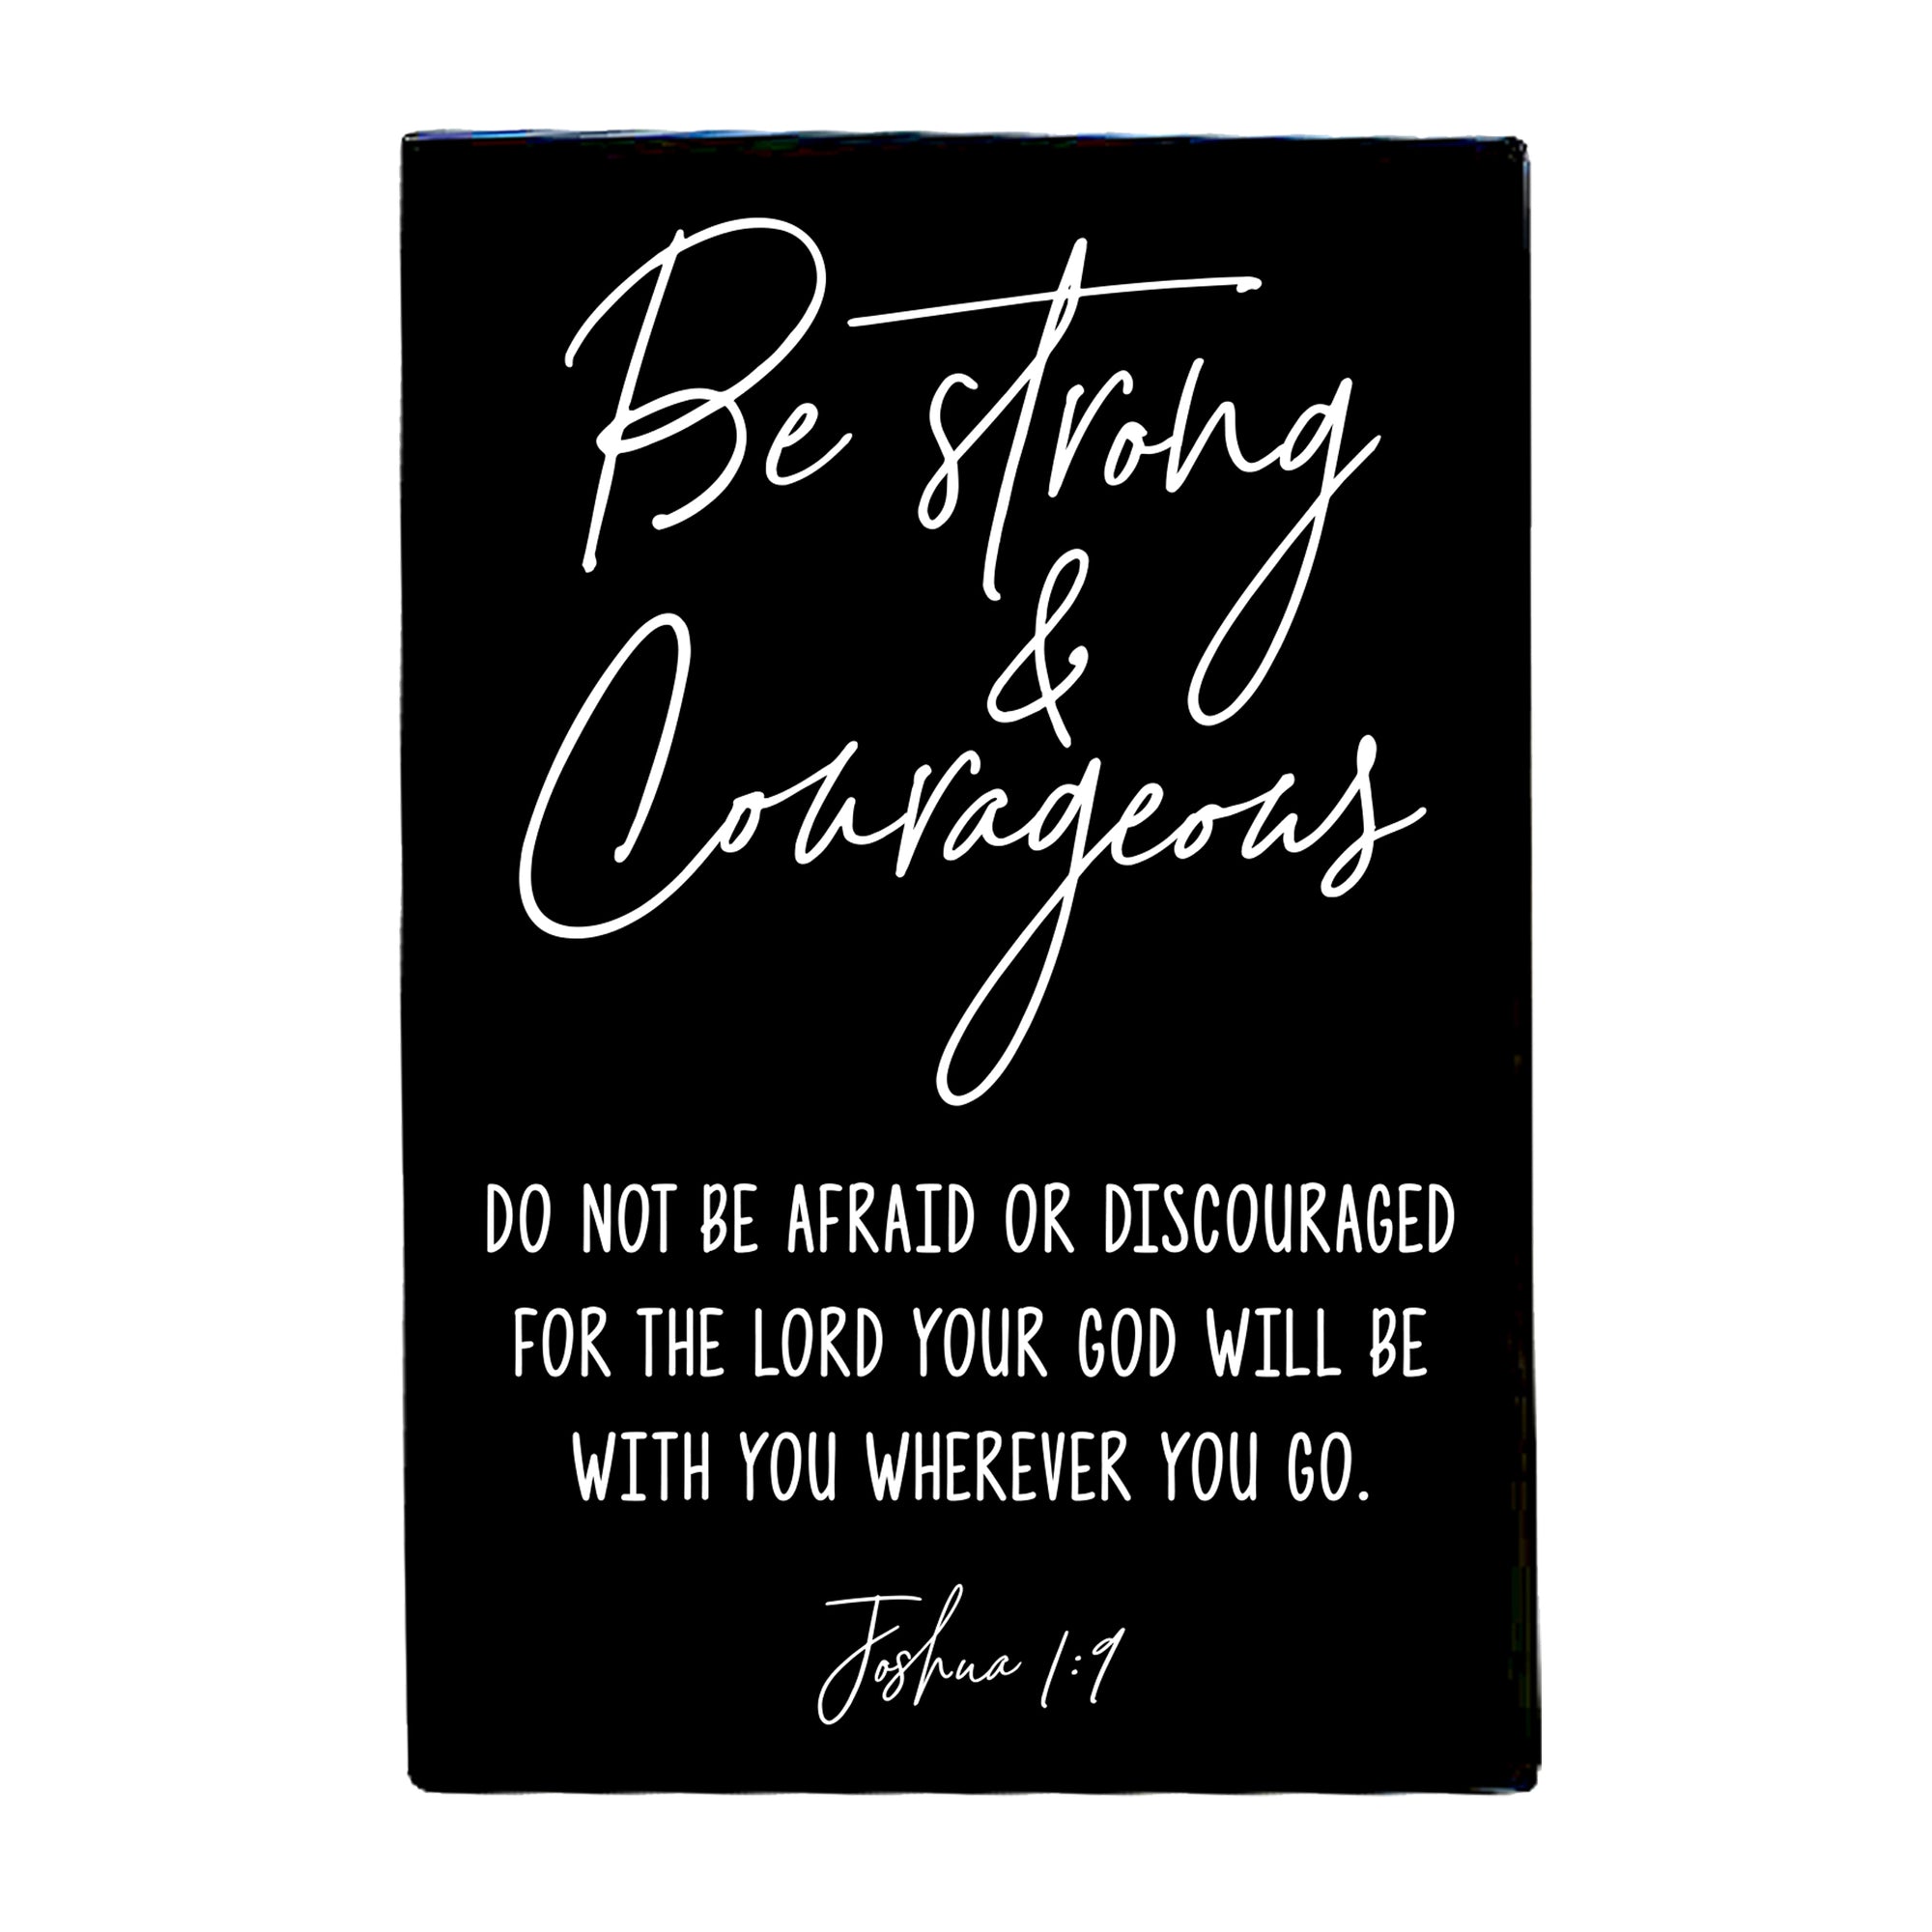 Wood Wall Sign with Inspirational Bible Verse Be Strong & Courageous Table Top Home Office Desk Decoration 5.5x8in